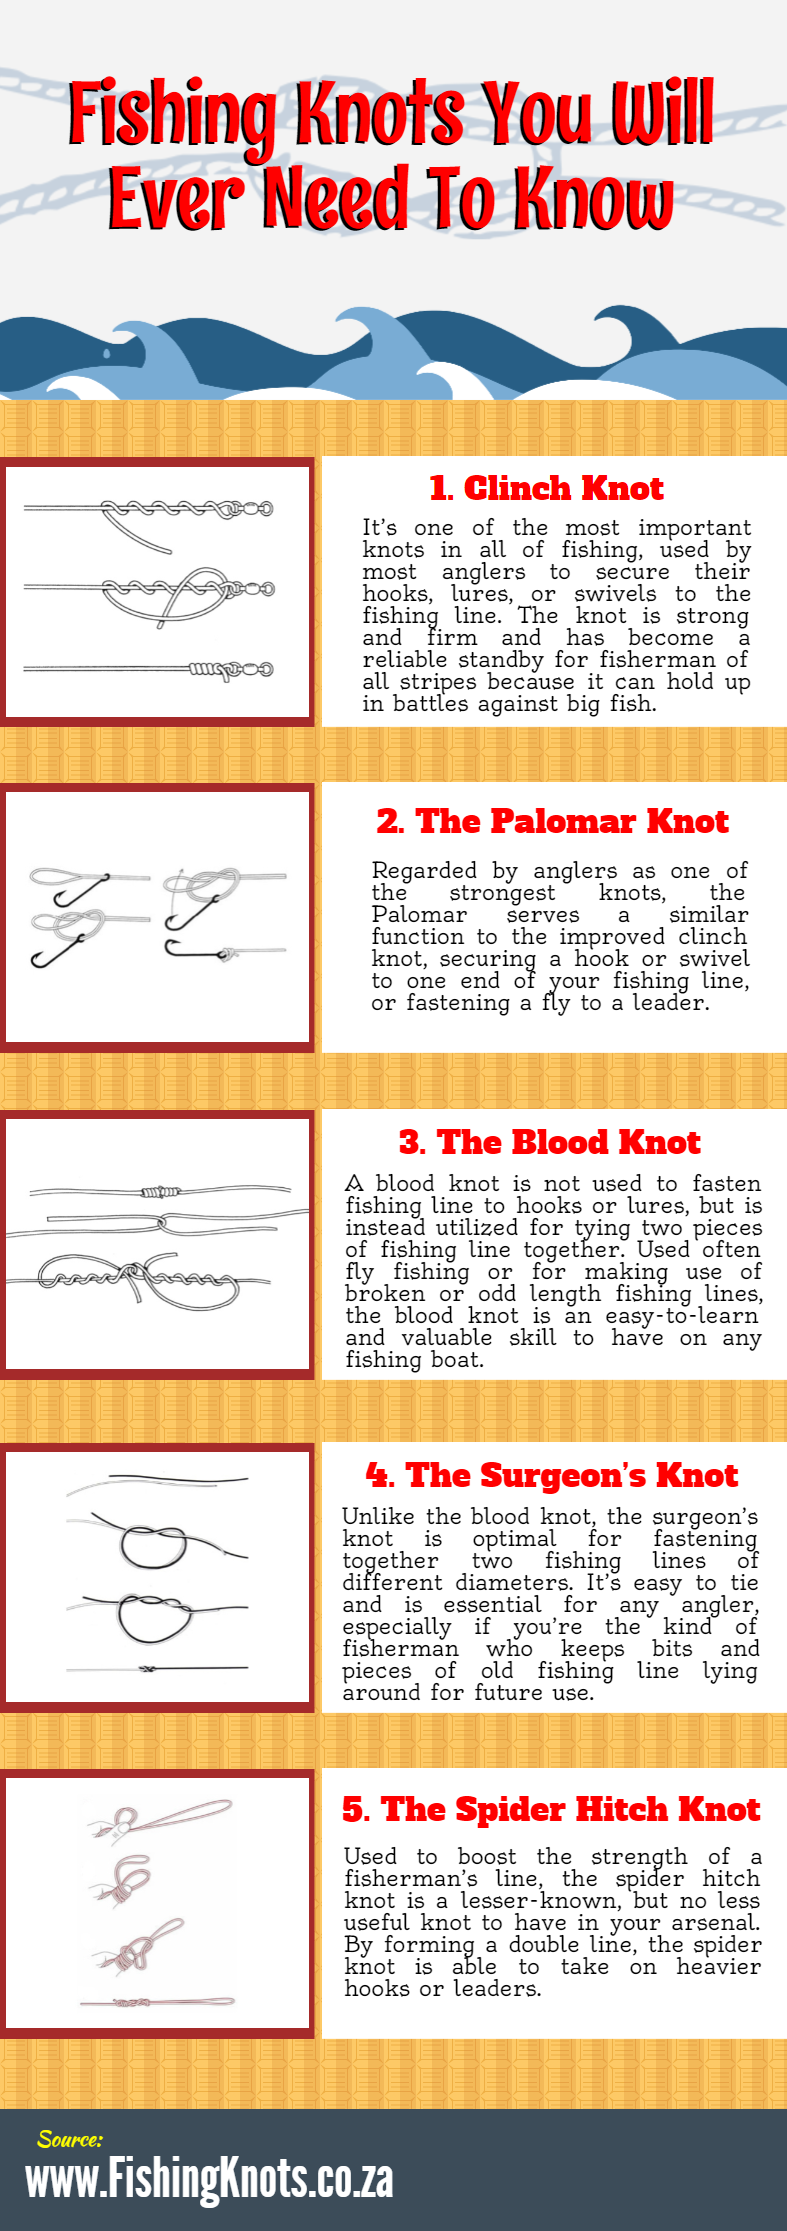 Fishing Knots You Will Ever Need To Know